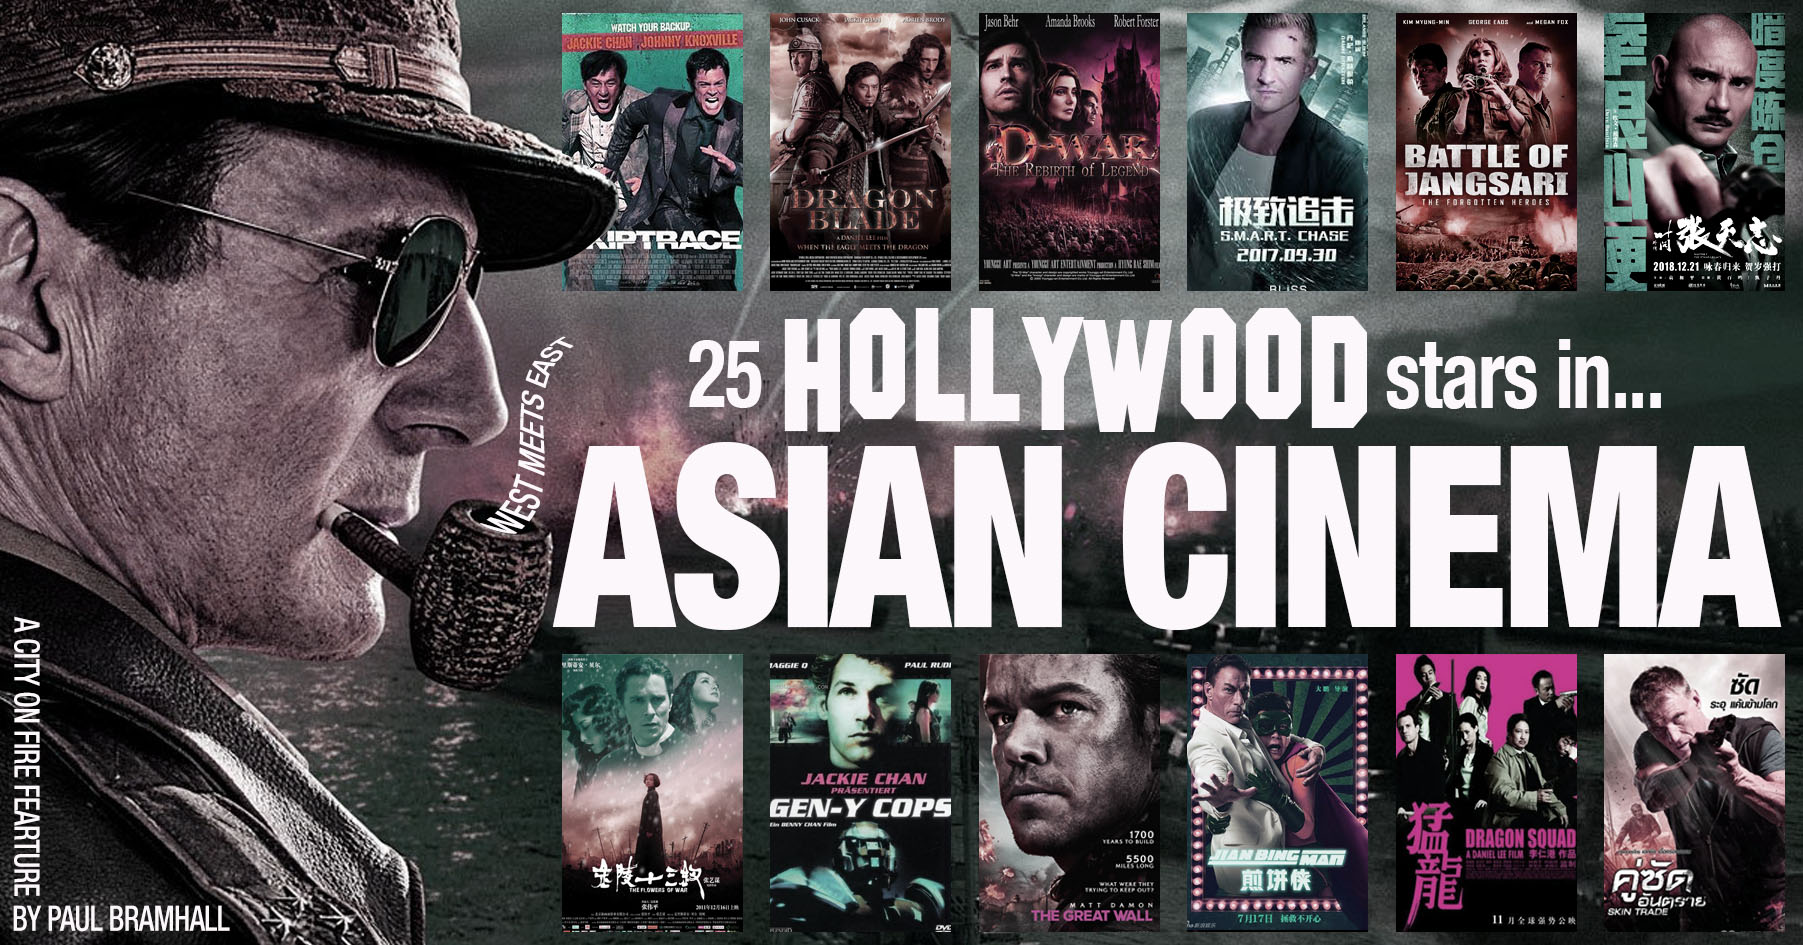 When West Meets East: 25 Hollywood Stars in Asian Cinema